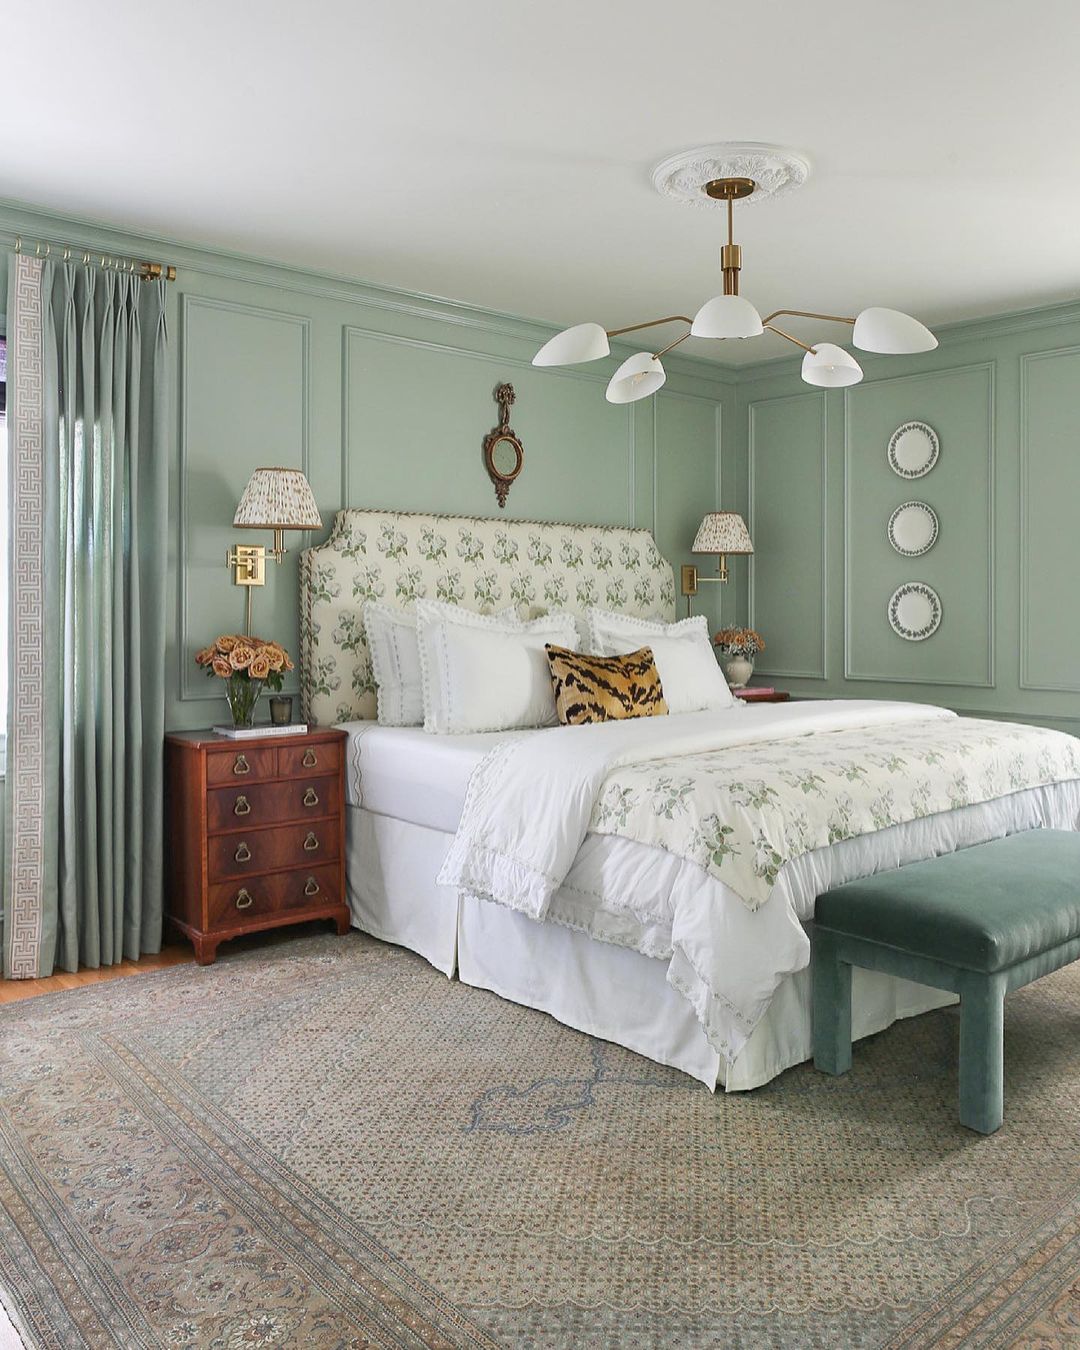 Painted green bedroom with a fluffy white duvet cover and green ottoman with sage walls and curtains. Photo by instagram user @aglassofbovino